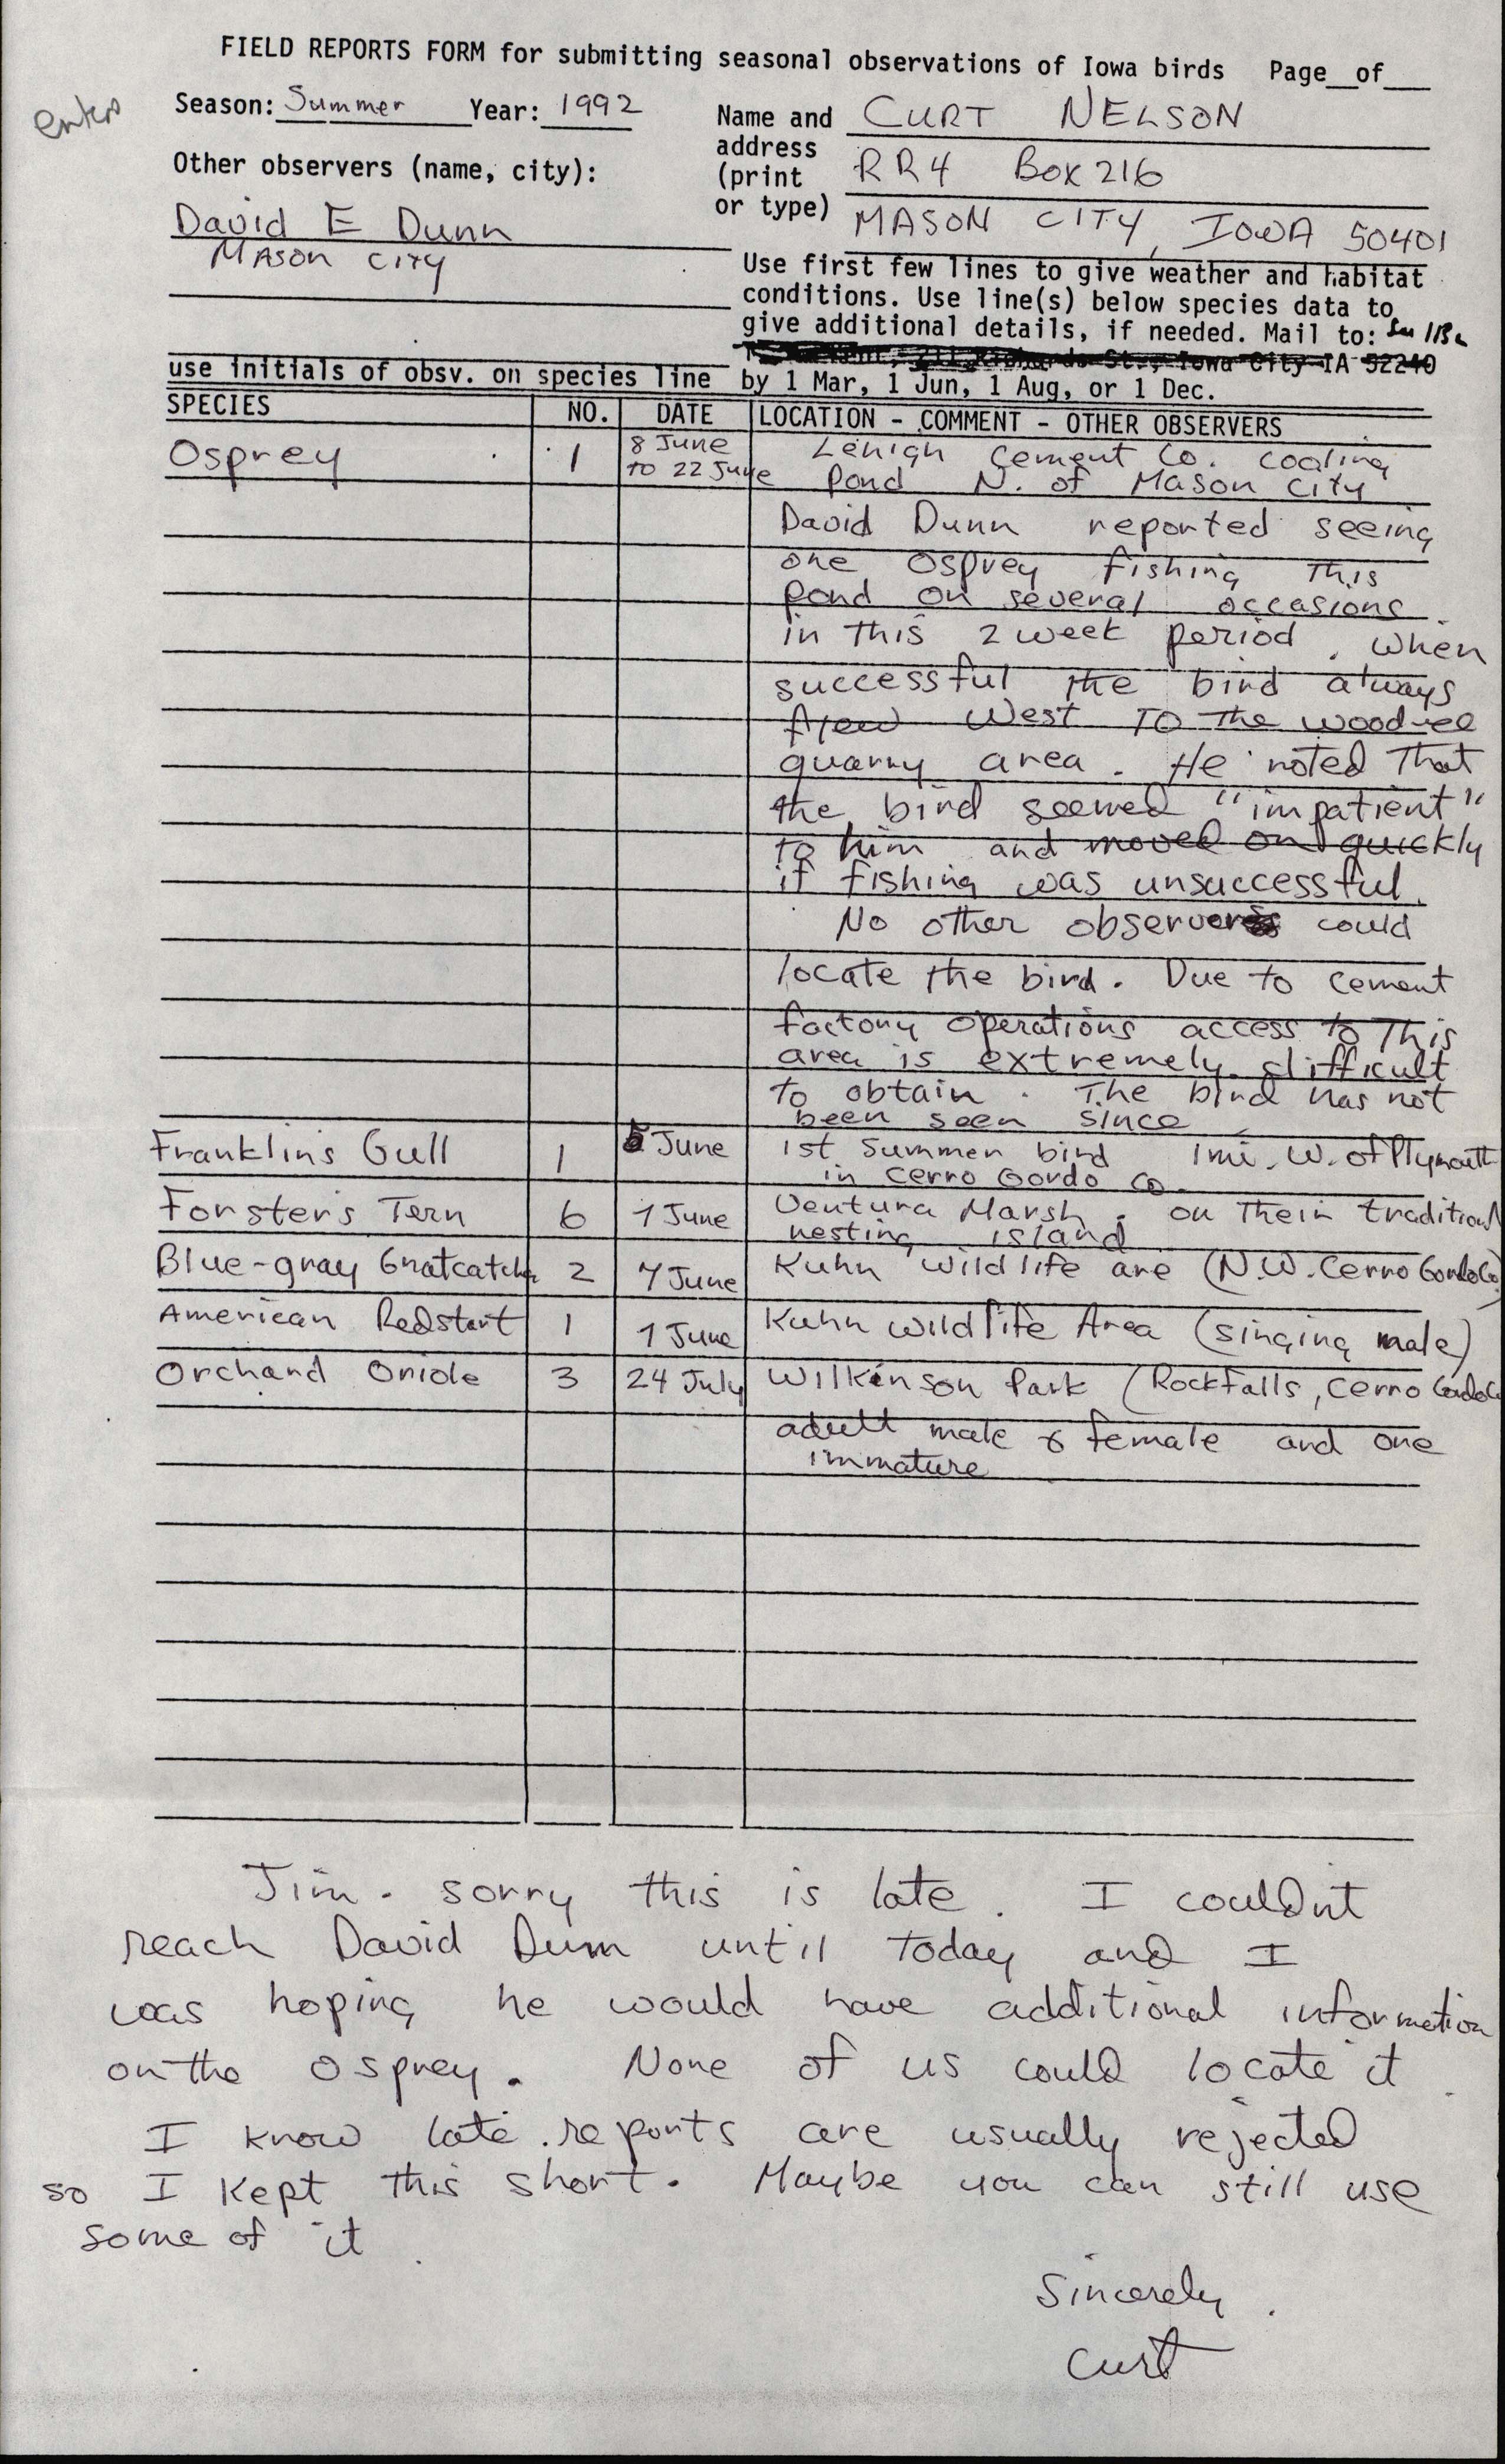 Field reports form for submitting seasonal observations of Iowa birds, Curtis Nelson, summer 1992